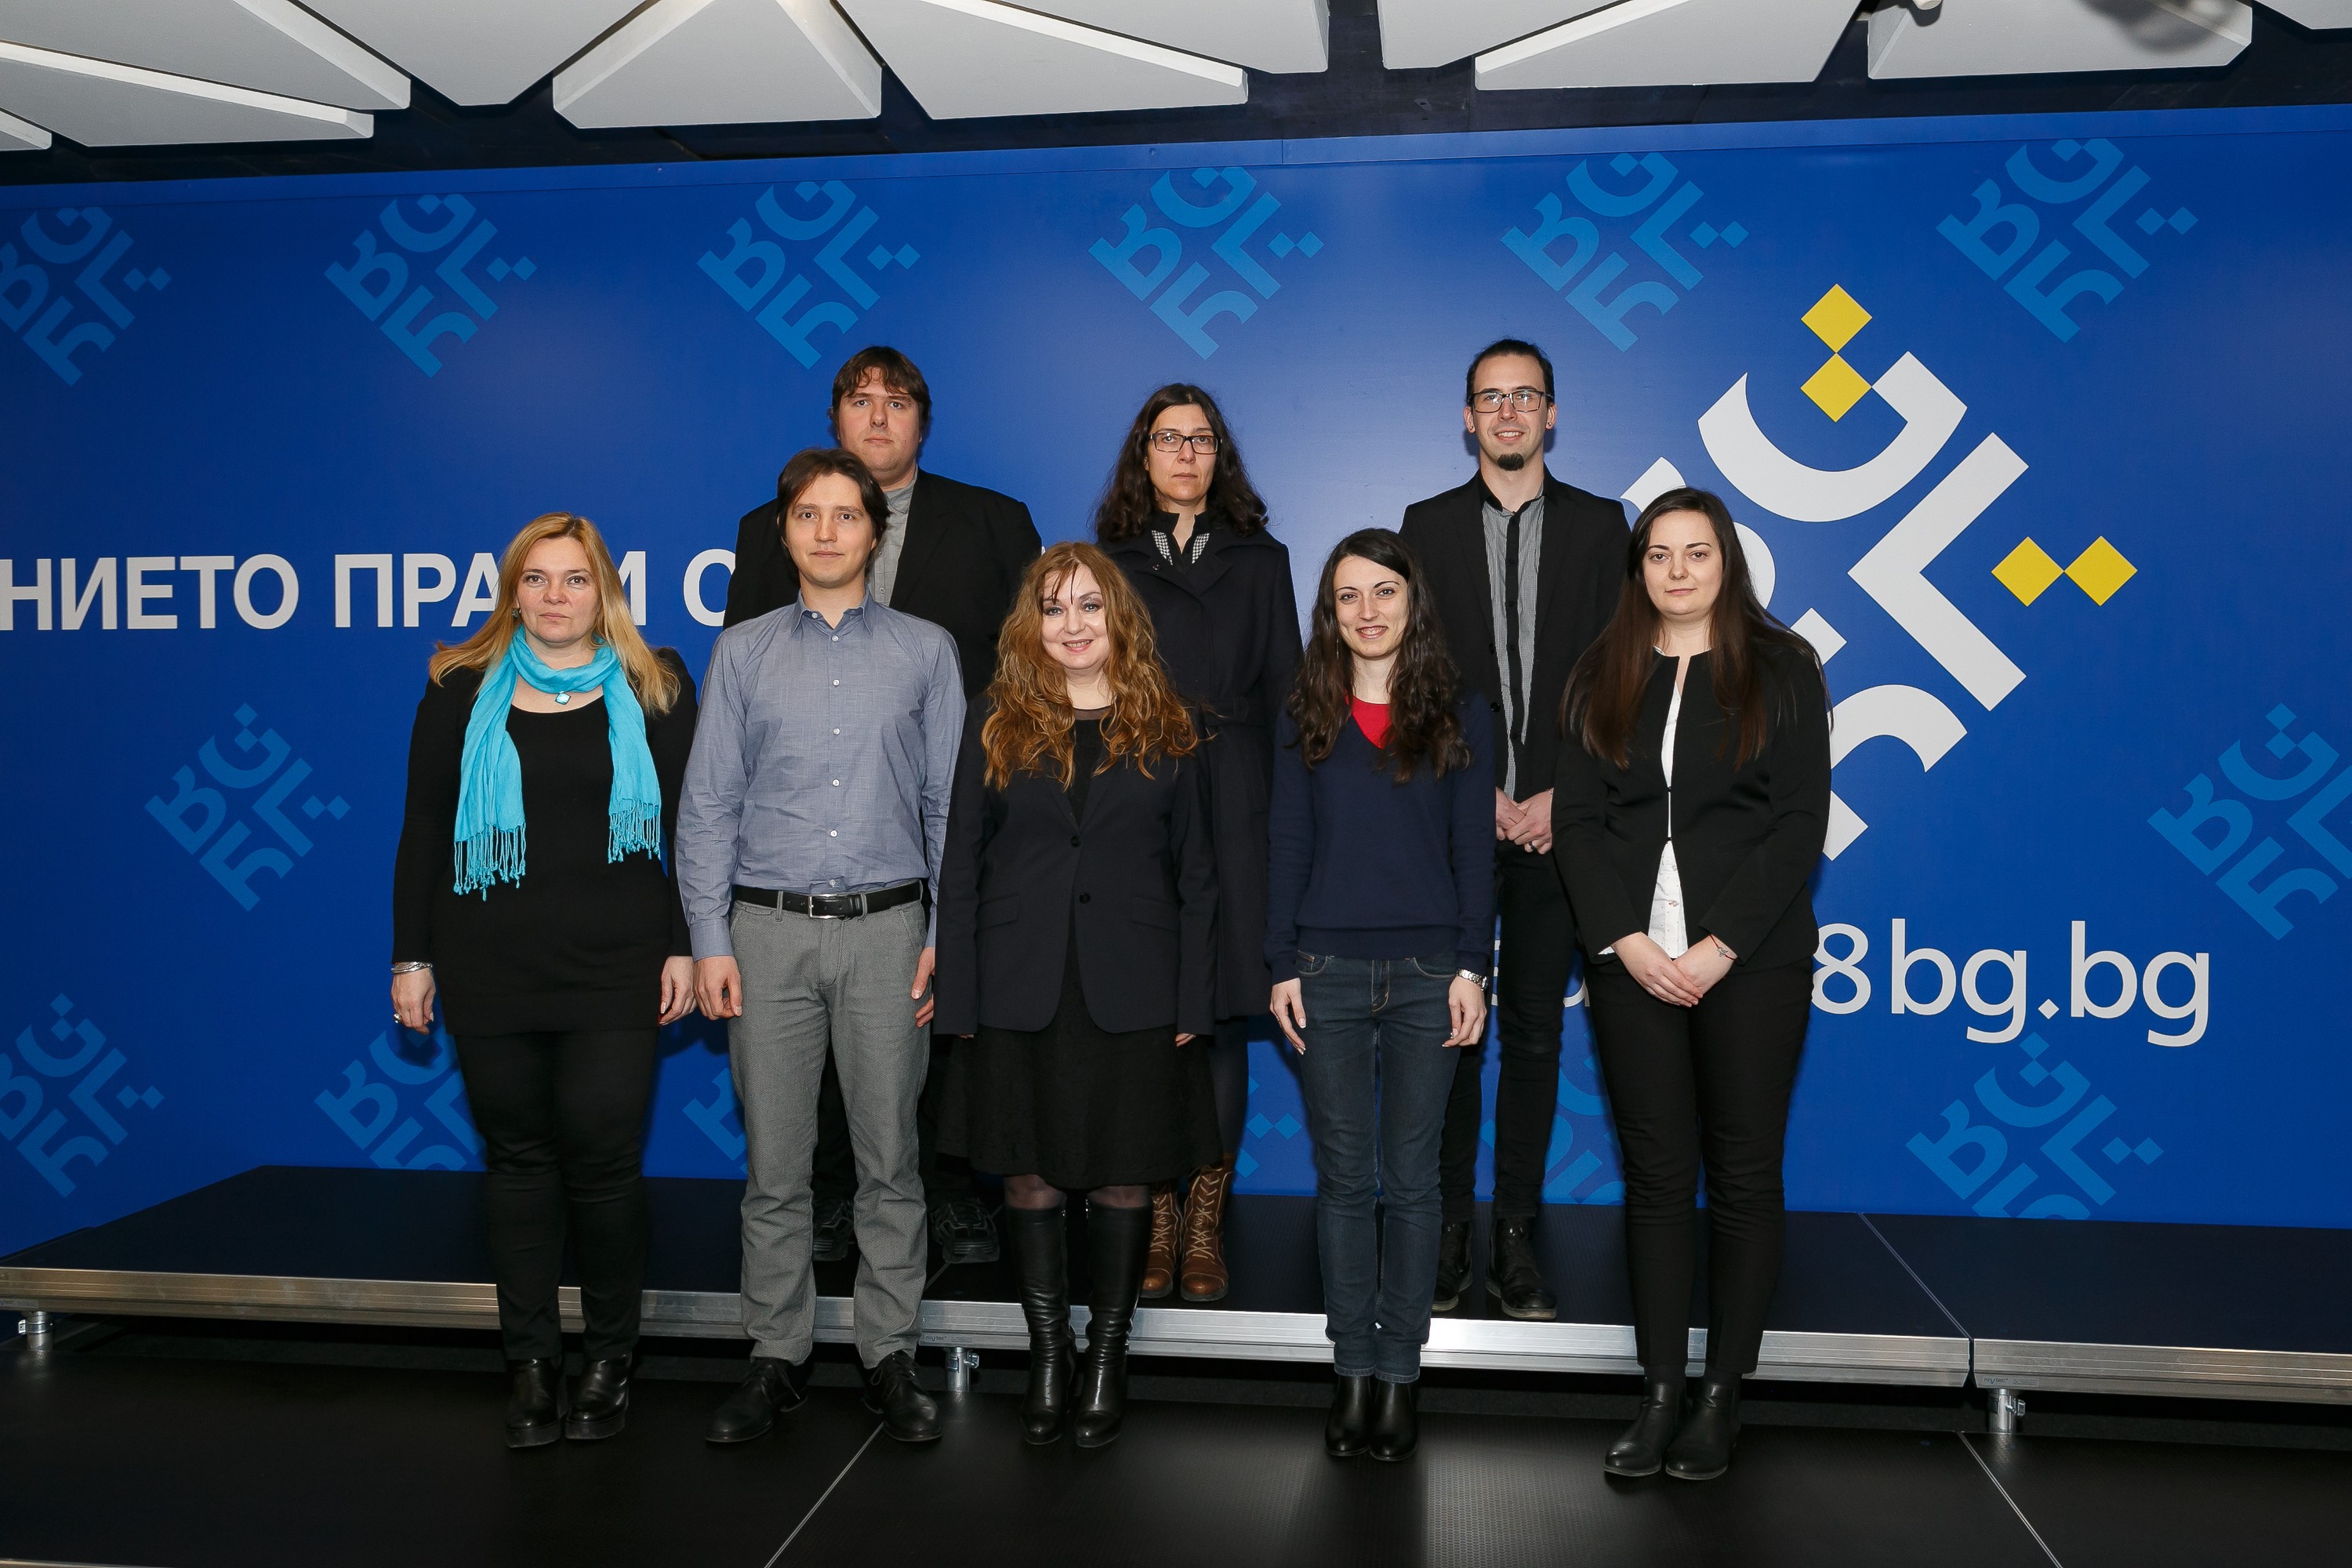 Institute for Bulgarian Language Organised the Seminar “Translator 2018” for the EU Council Presidency